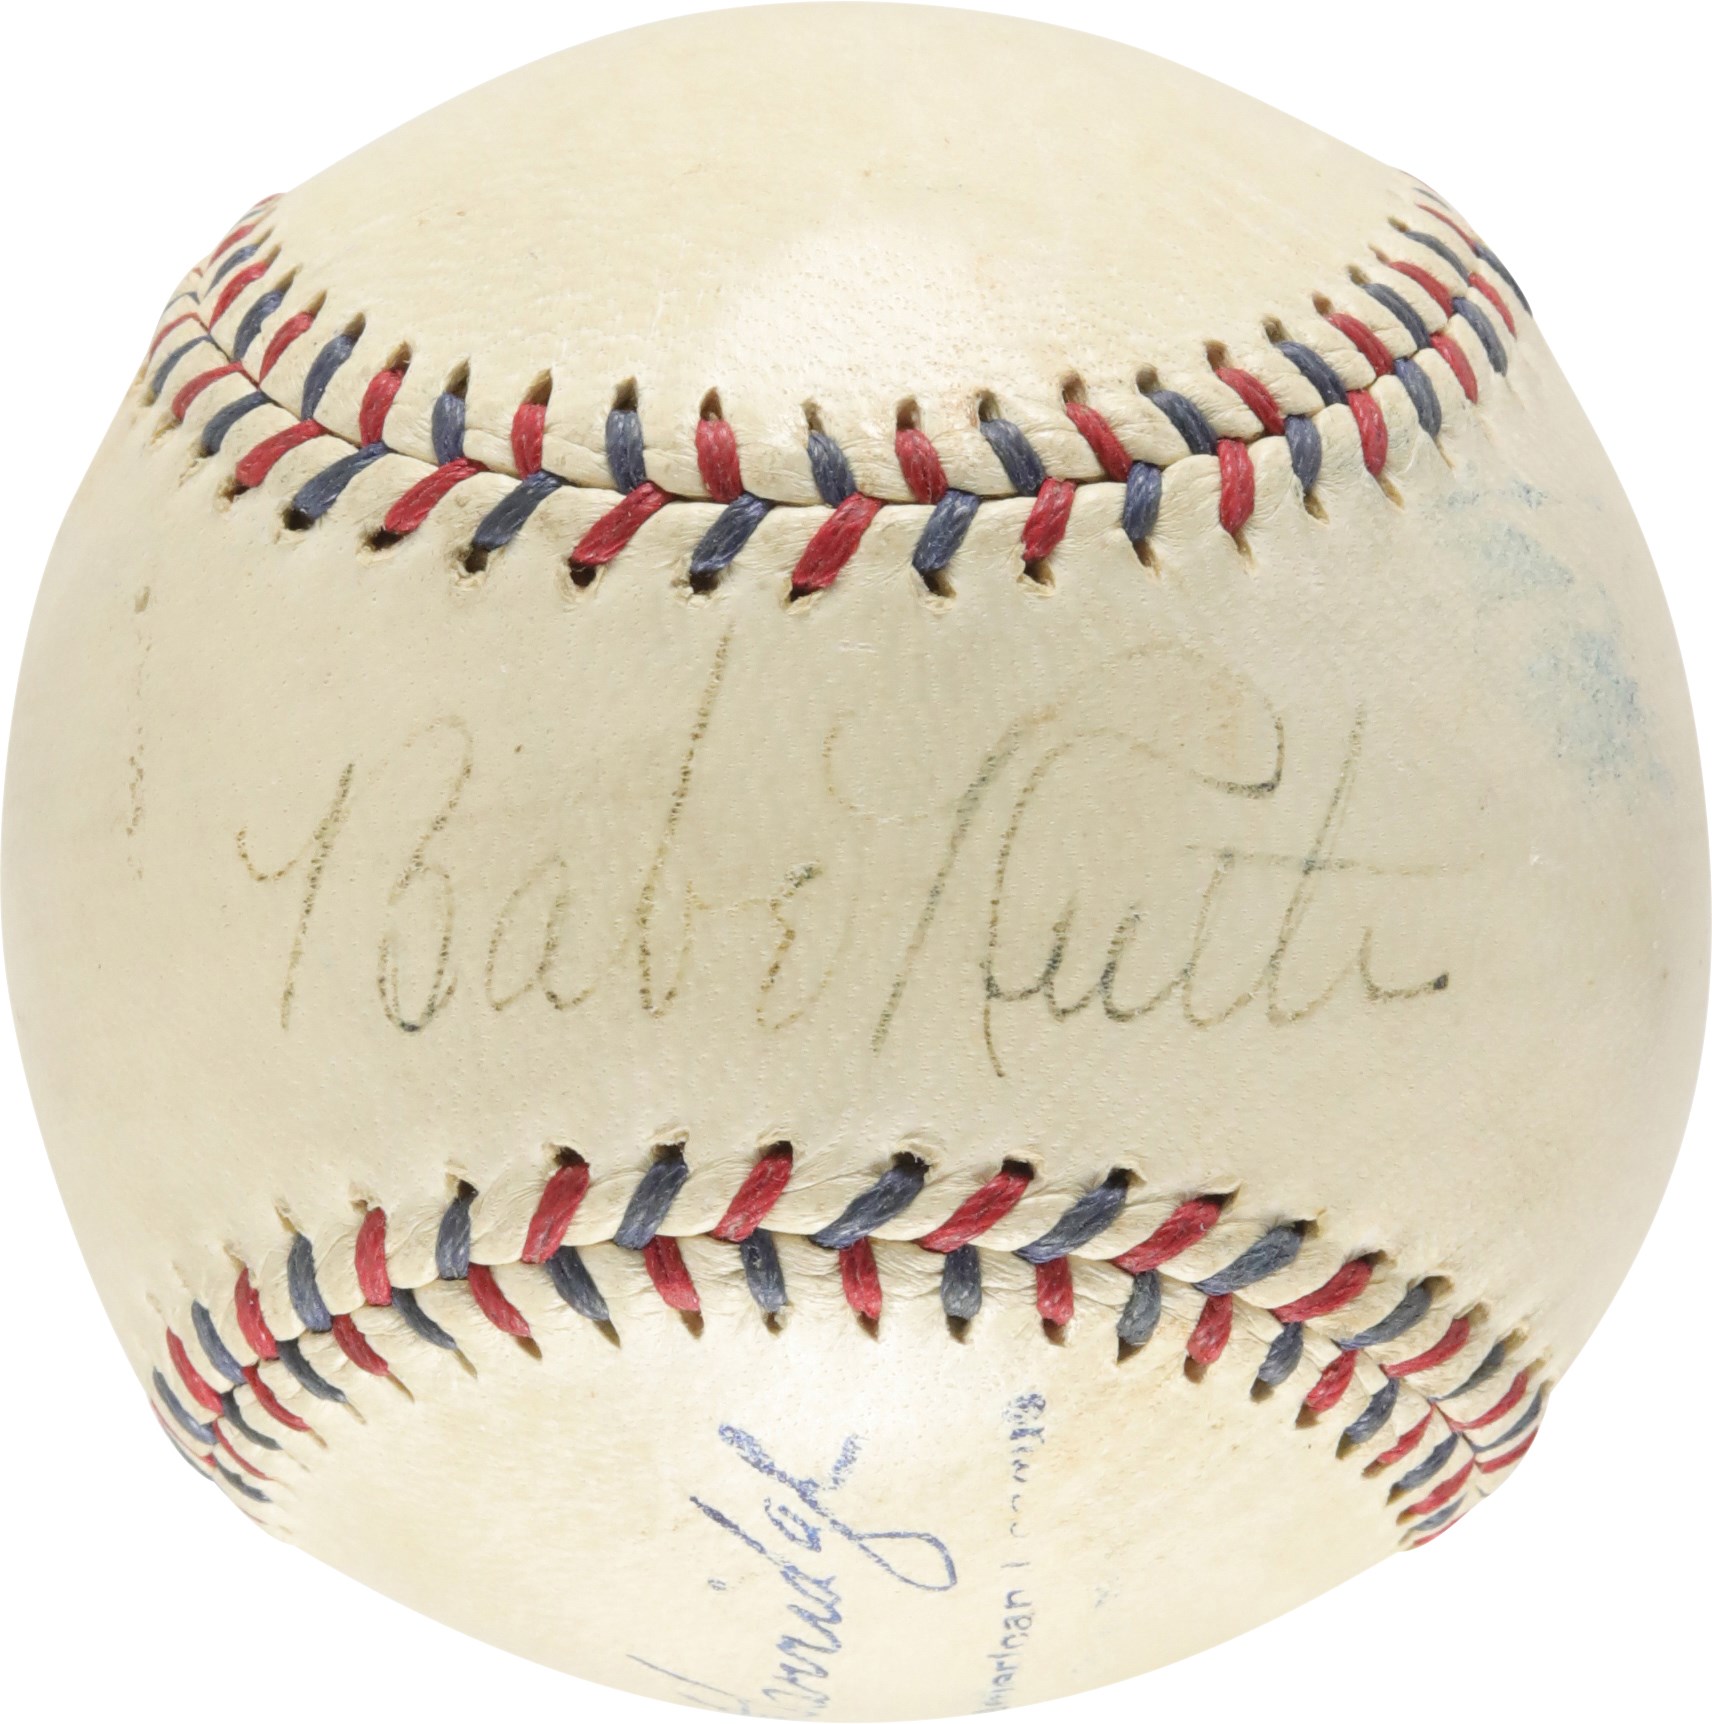 Ruth and Gehrig - Gorgeous c. 1932 Babe Ruth Single-Signed Baseball (PSA)